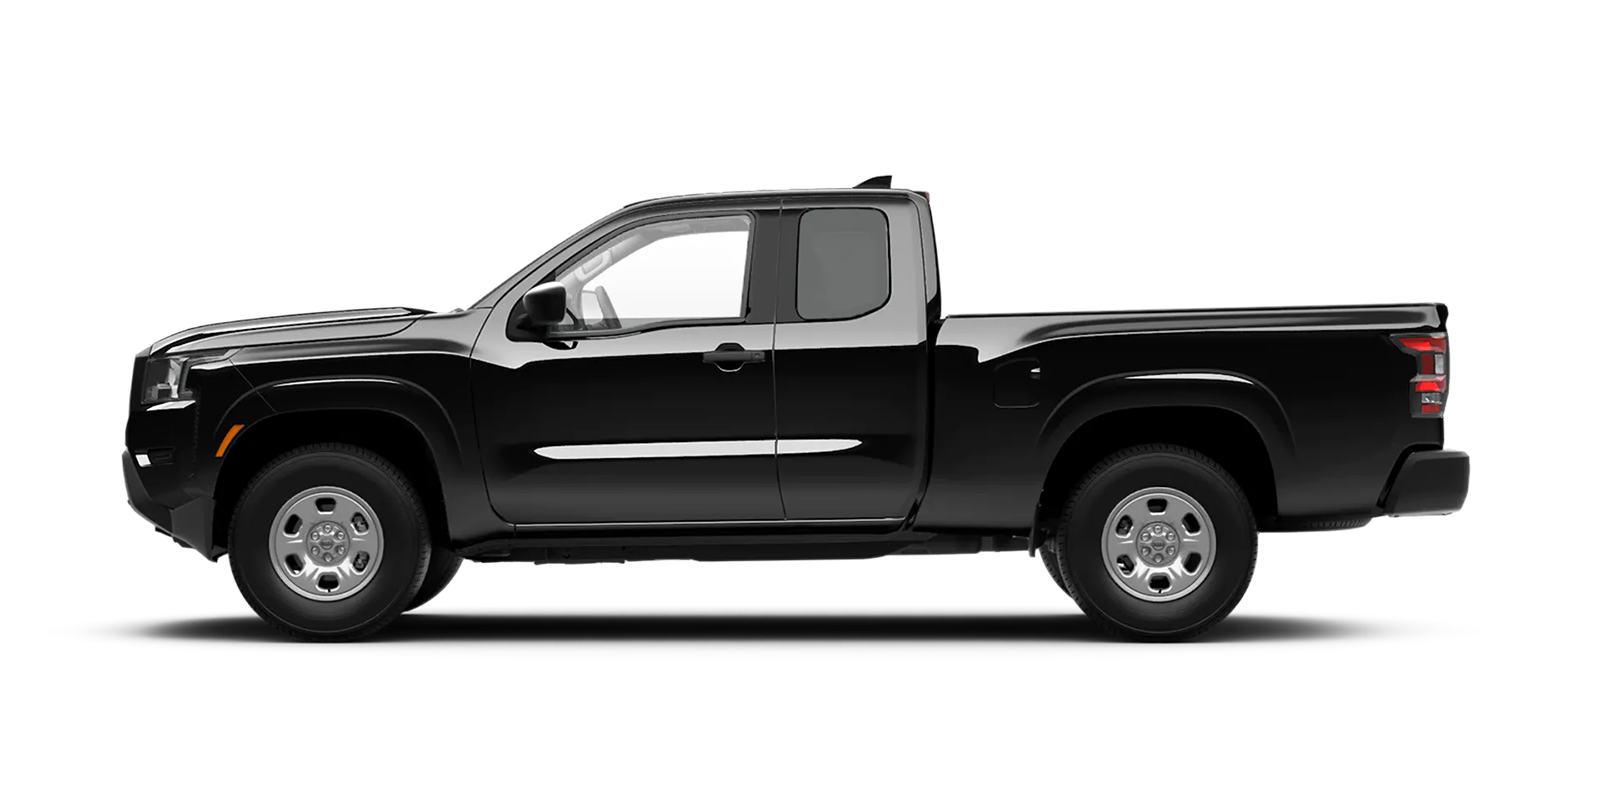 2022 Frontier King Cab S 4x4 in Super Black | Grainger Nissan of Anderson in Anderson SC